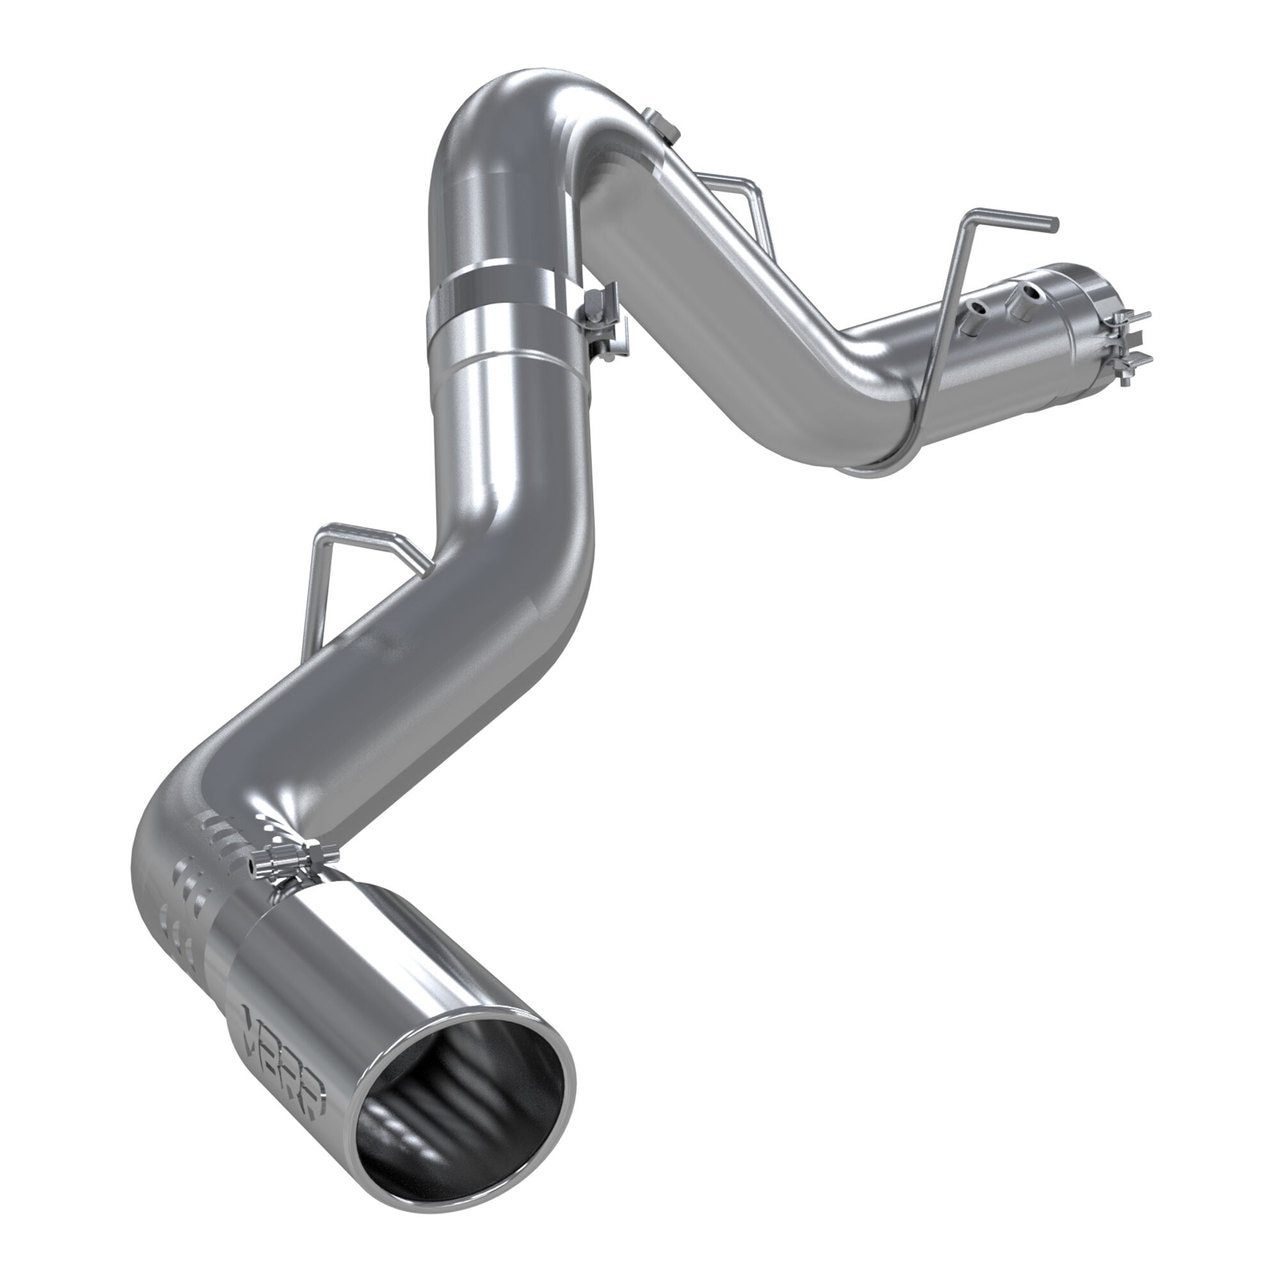 '20-23 Chevy/GMC 2500/3500 6.6L Duramax T304 4" Single Side Exhaust MBRP display